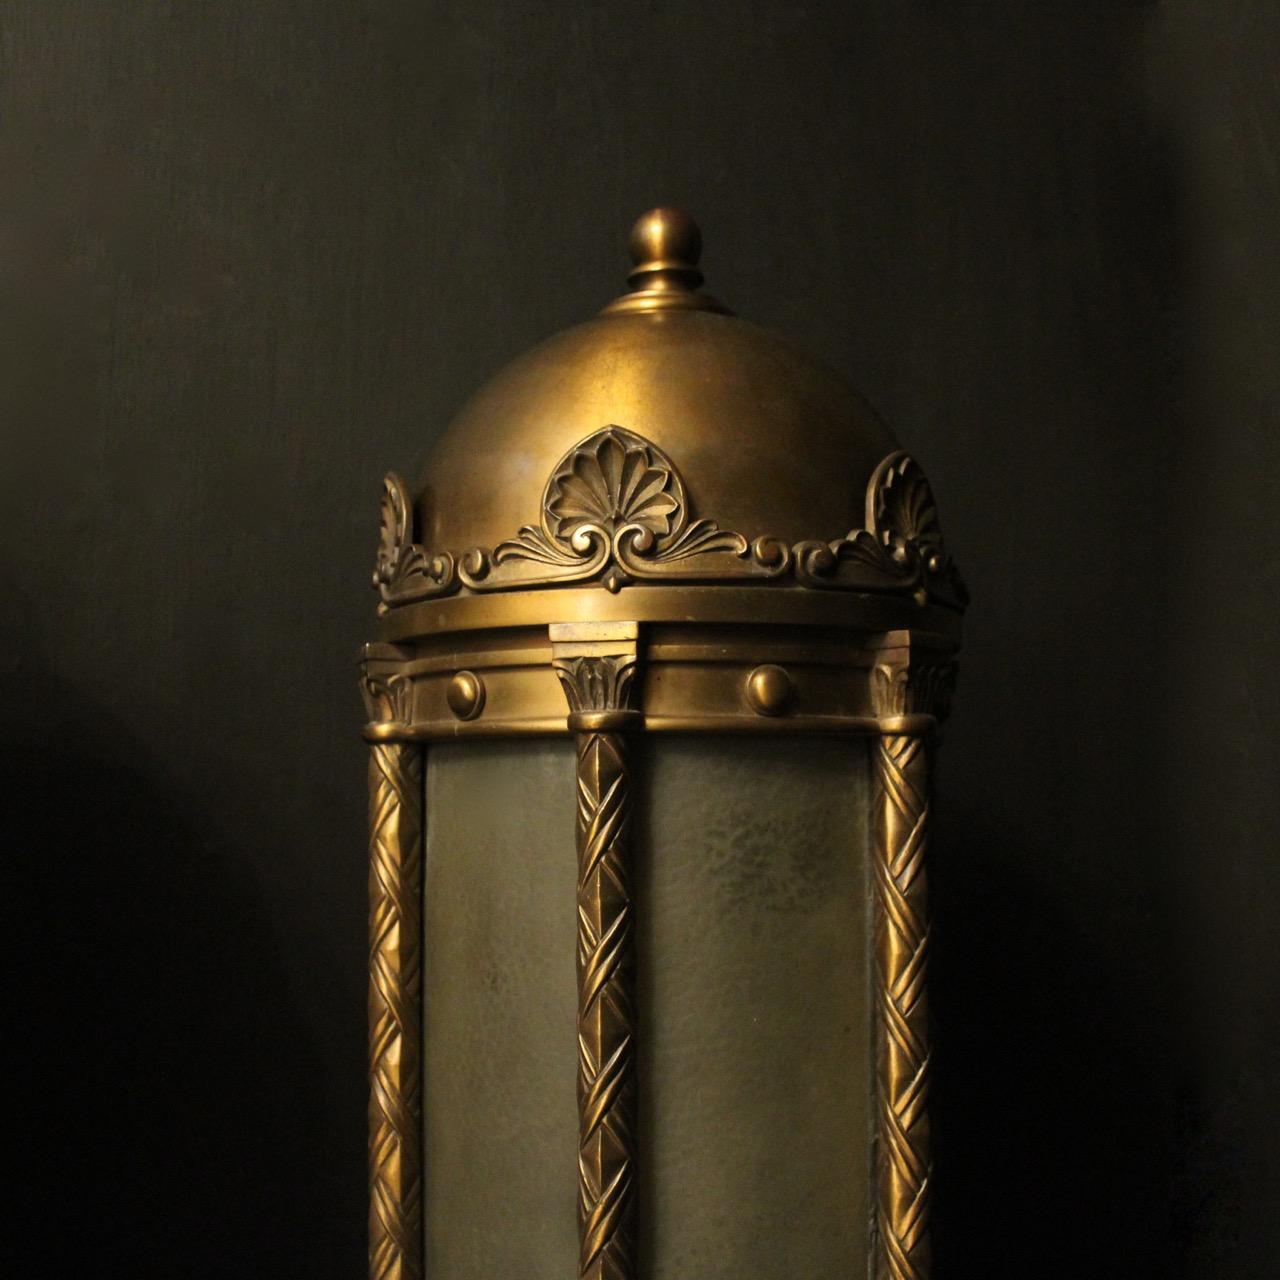 An English pair of single light bronze external antique wall lanterns, the original sectional frosted glass panels held within a lovely domed shaped ornate scrolling bronze framework with ribbon clad columns surrounded by a decorative Anthemion